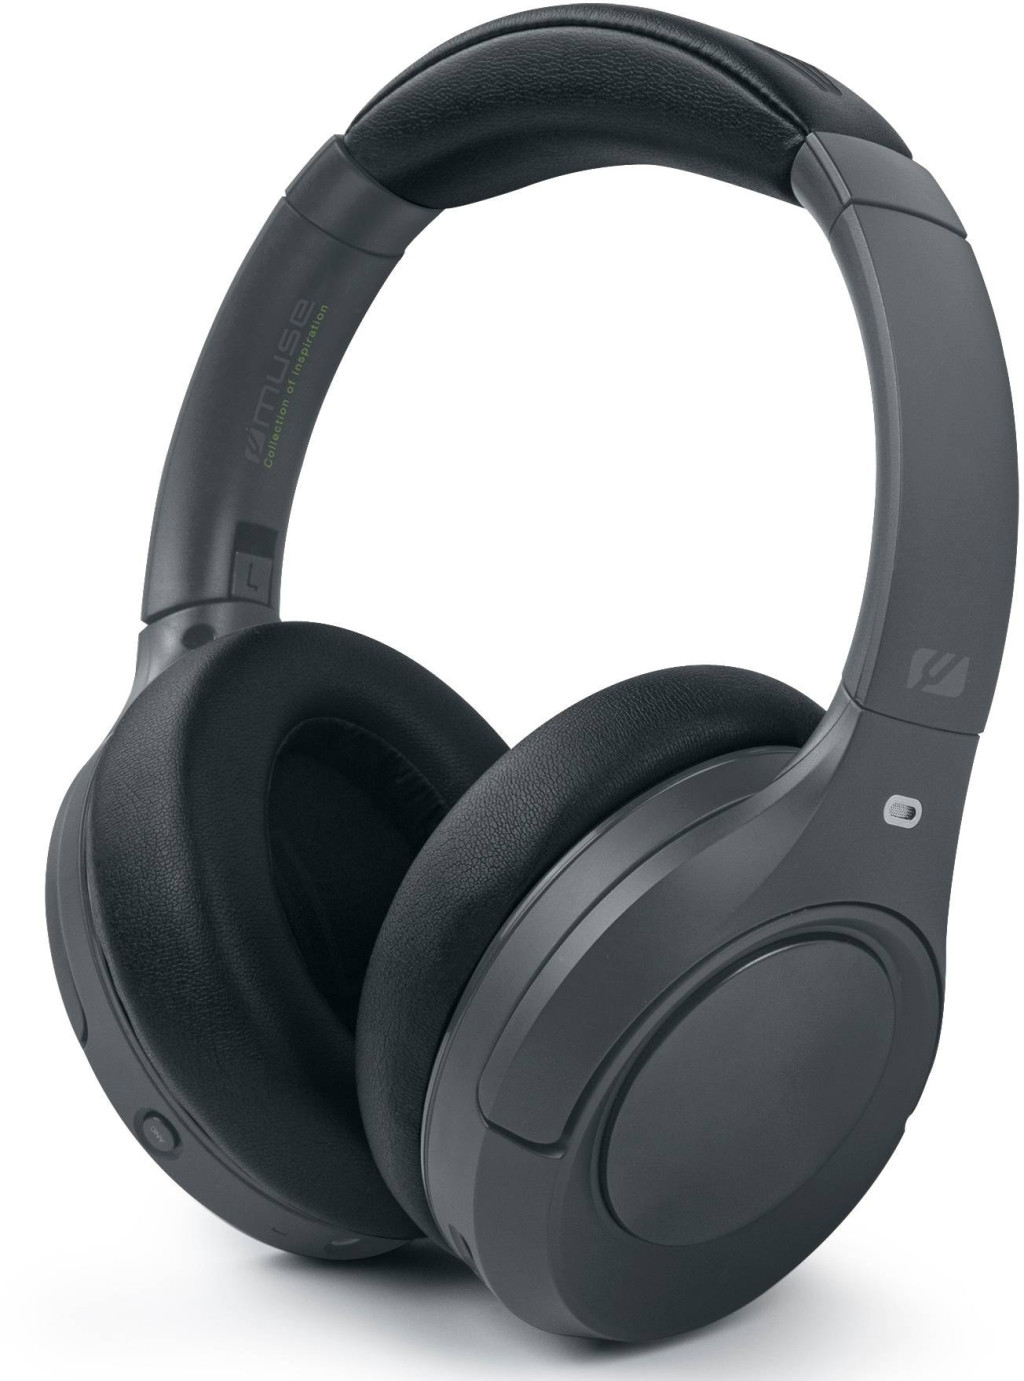 Muse | Headphones | M-295 ANC | Bluetooth | Over-ear | Microphone | Noise canceling | Wireless | Black